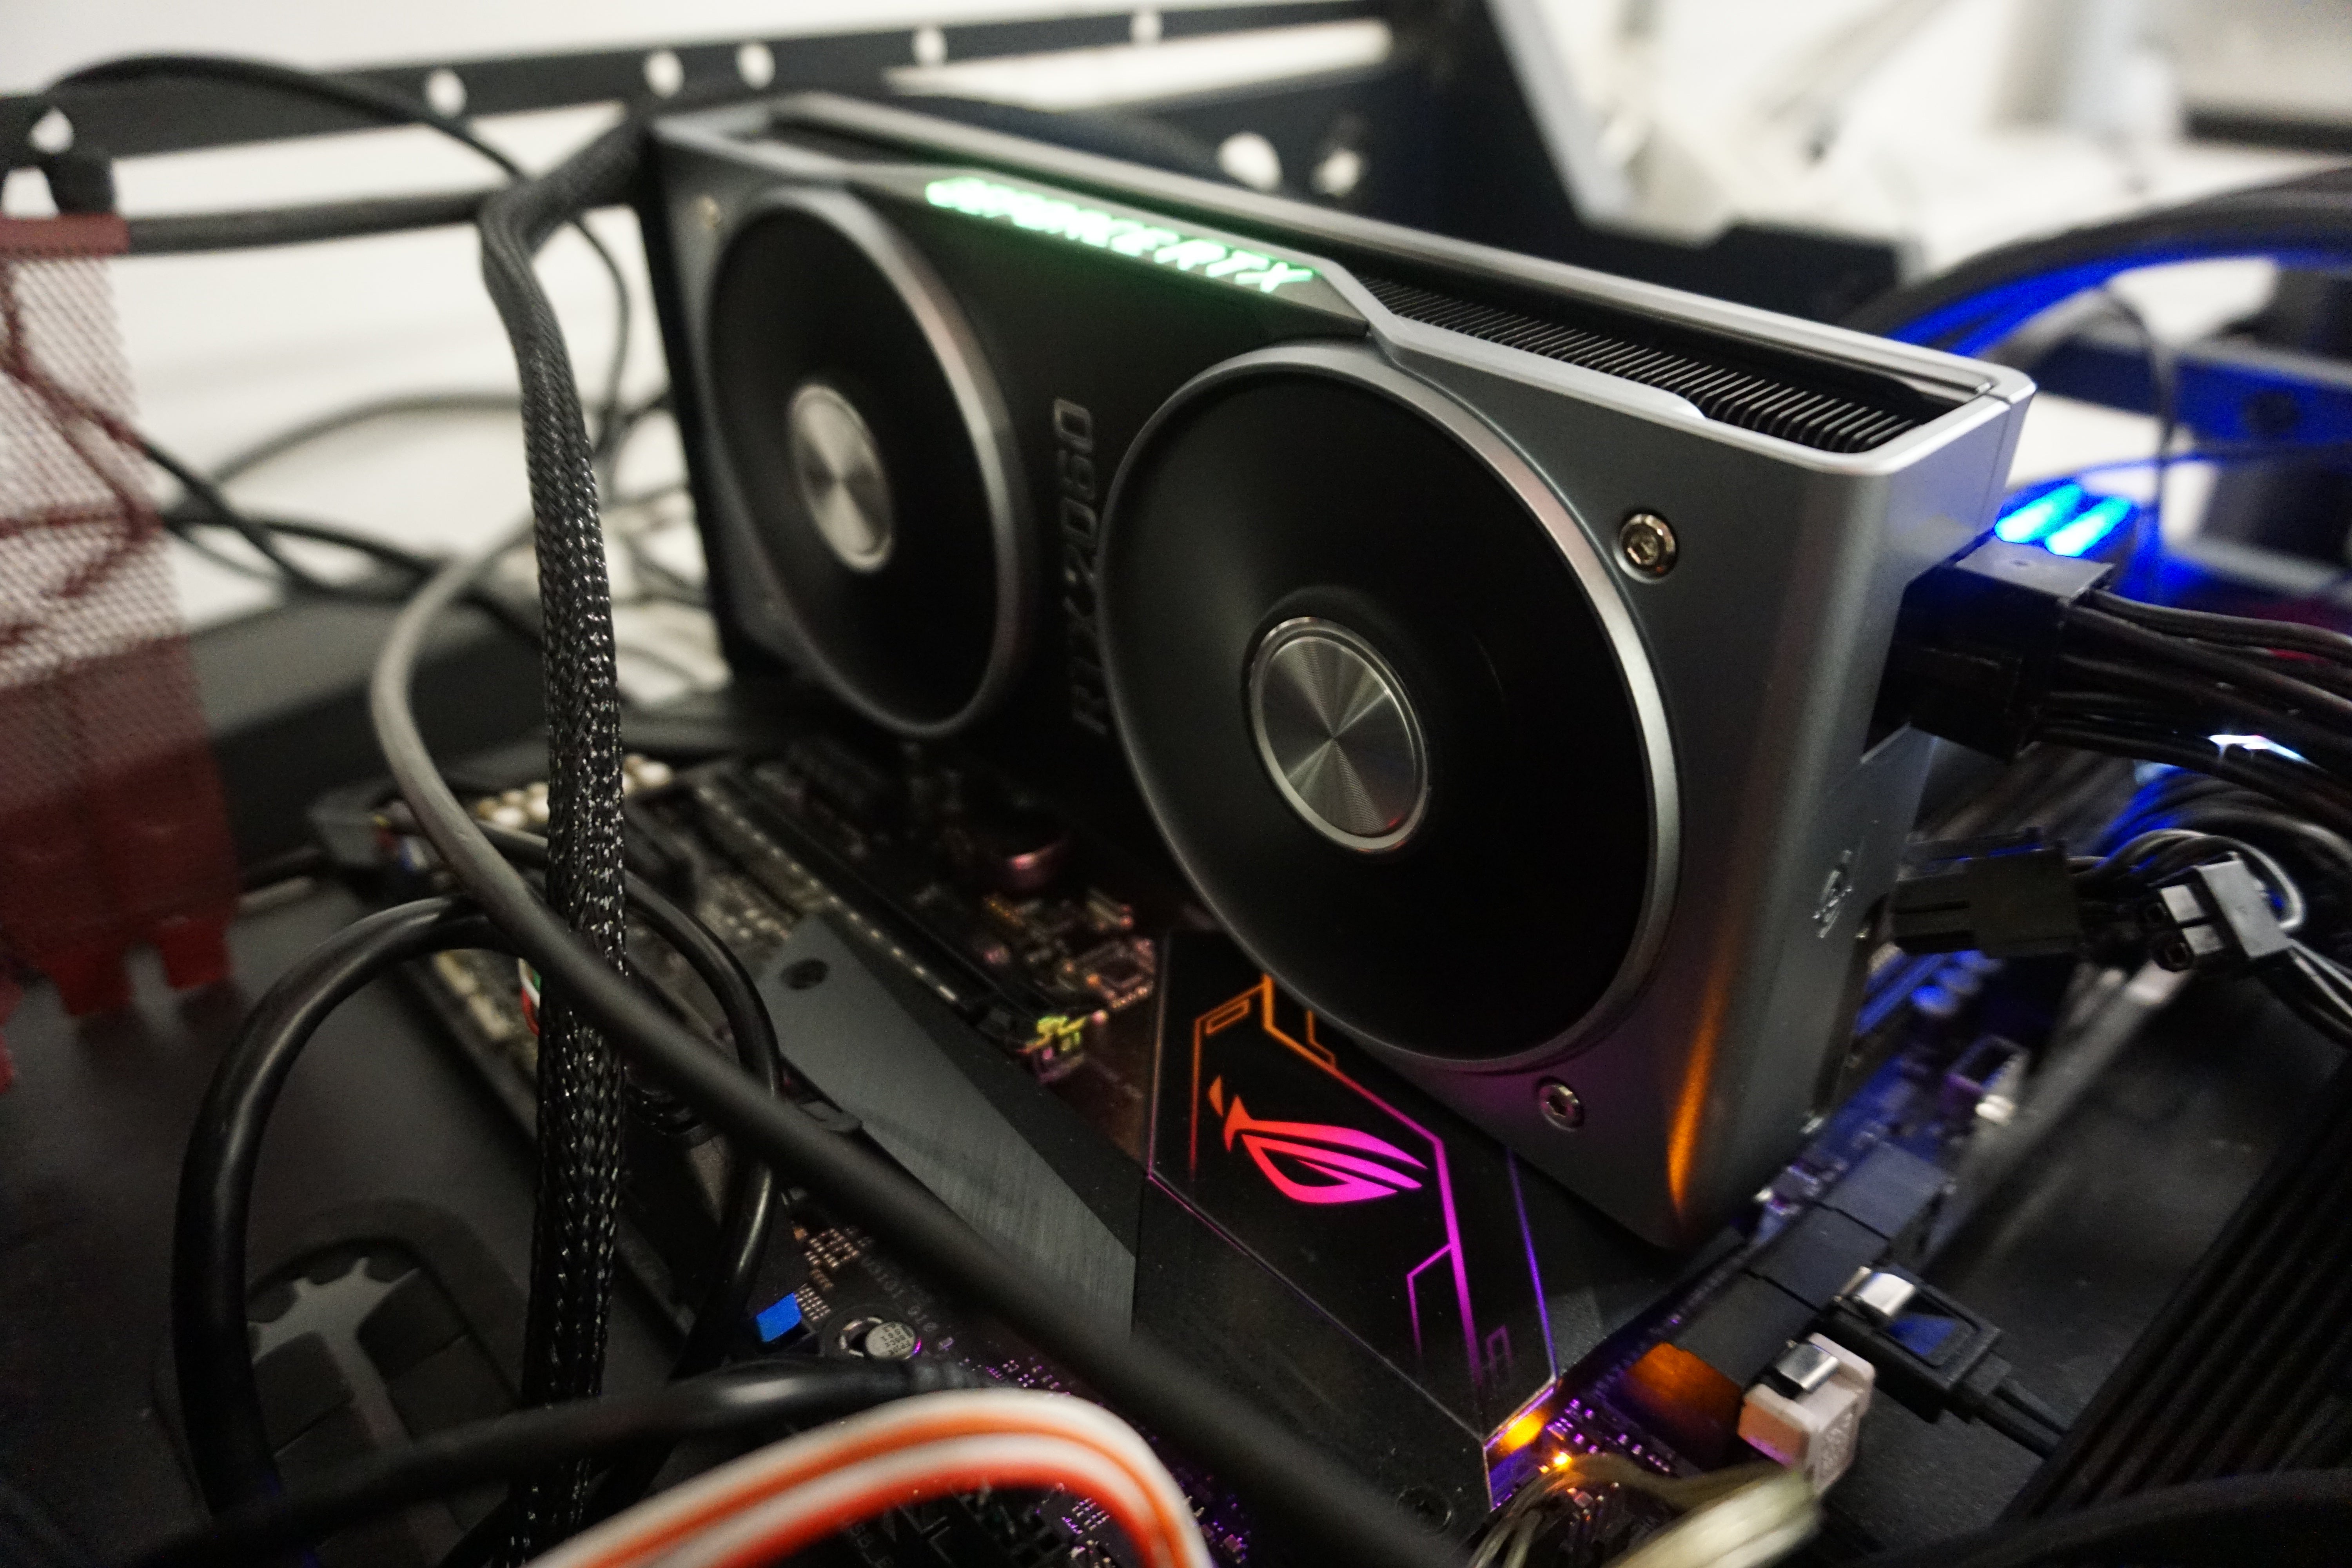 blanding Vend om Sorg Nvidia RTX 2060 review: The cheapest RTX card is an affordable wonder